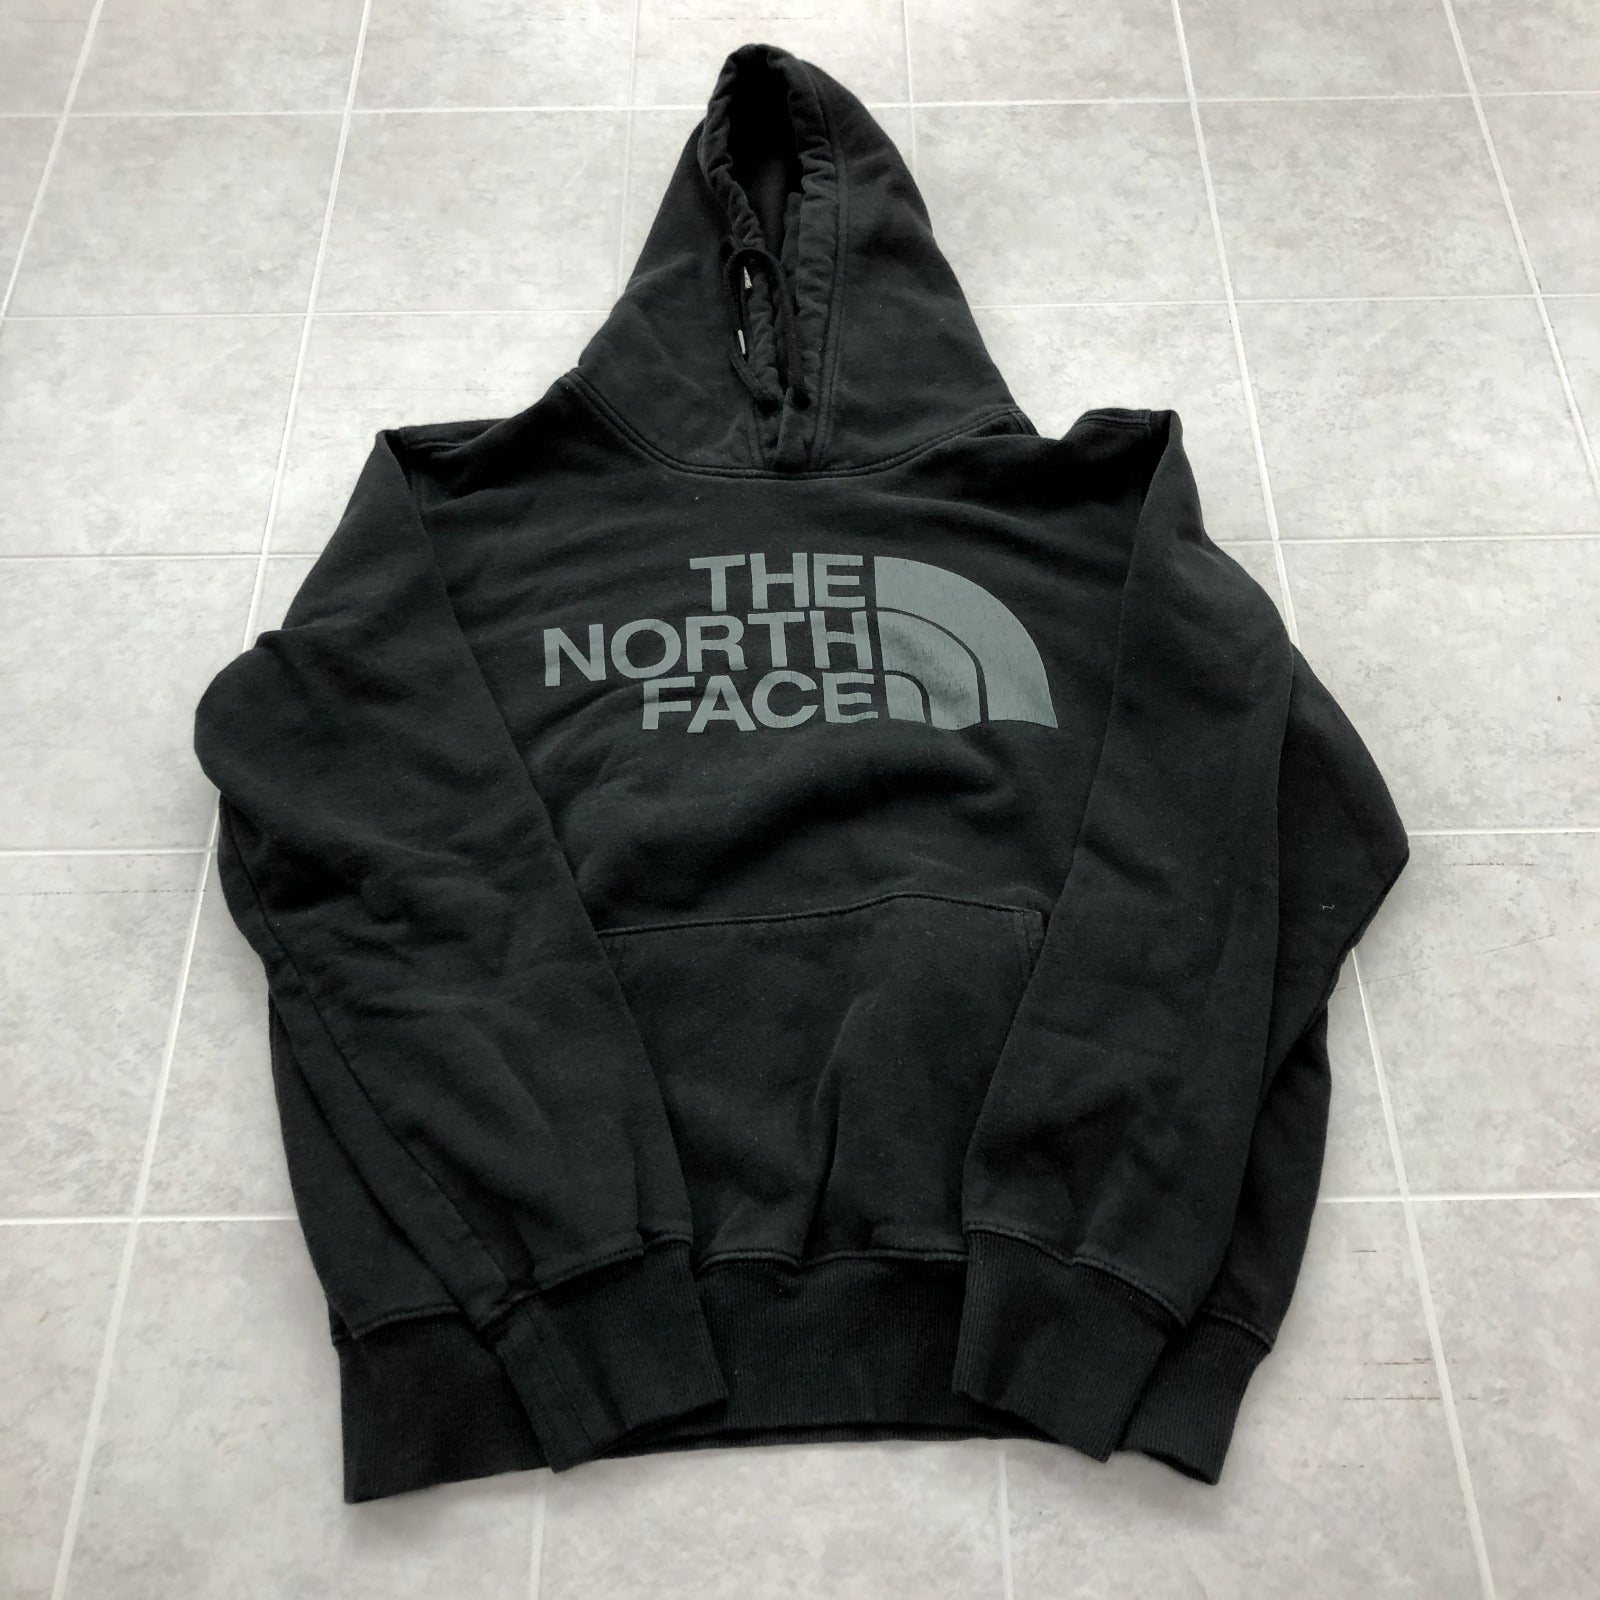 The North Face Black Long Sleeve Graphic Logo Hoodie Sweatshirt Adult Size M